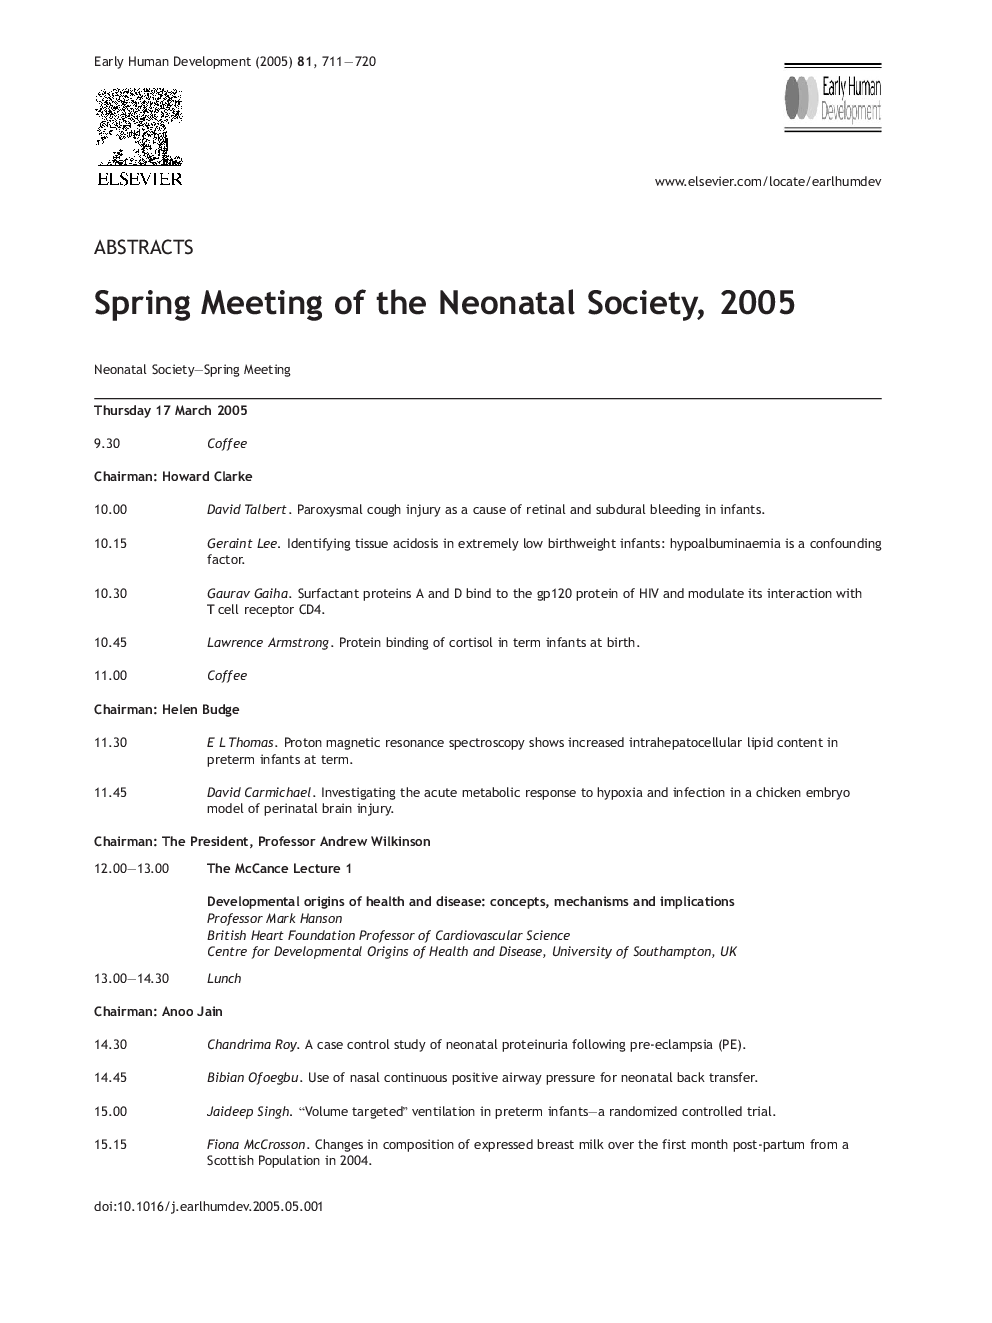 Spring Meeting of the Neonatal Society, 2005